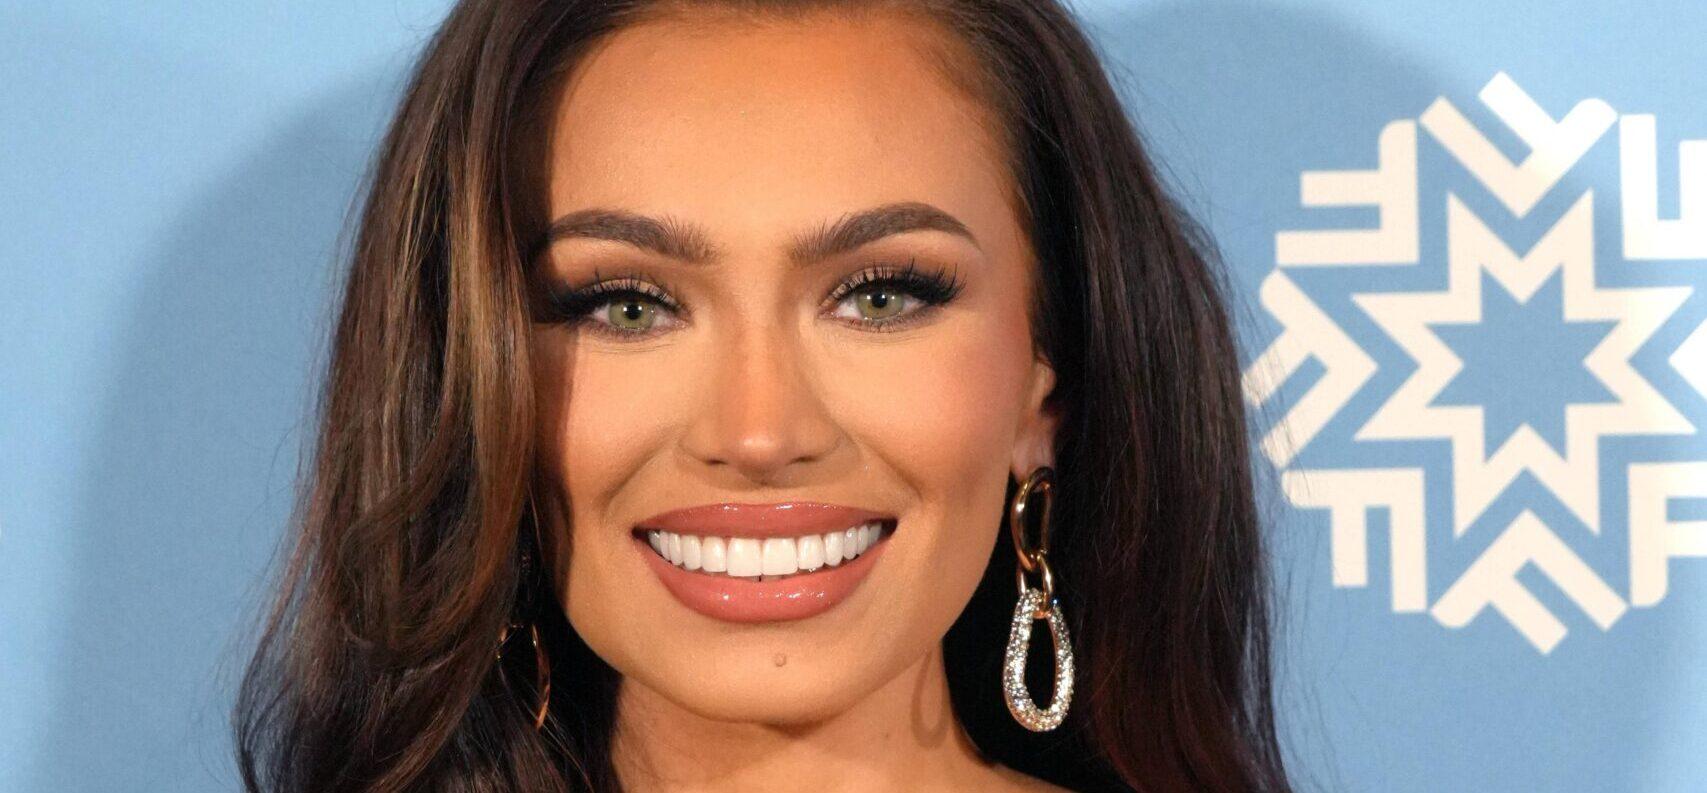 Former Miss USA Accuses Organization Of ‘Bullying and Harassment,’ Creating a ‘Toxic’ Workplace